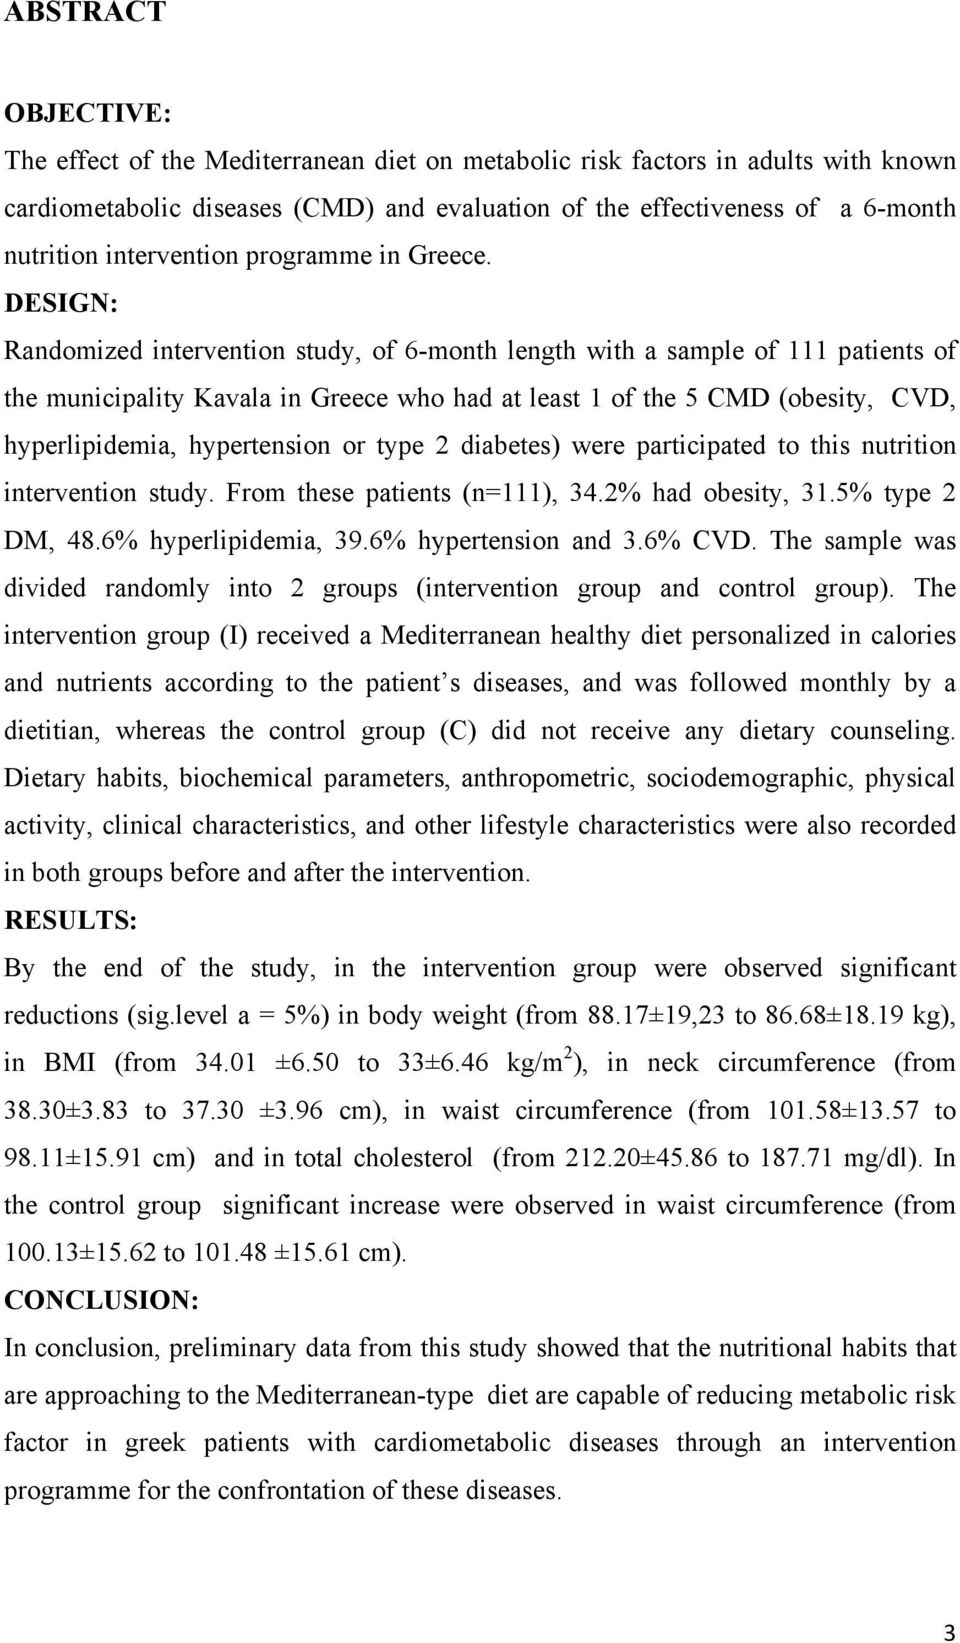 DESIGN: Randomized intervention study, of 6-month length with a sample of 111 patients of the municipality Kavala in Greece who had at least 1 of the 5 CMD (obesity, CVD, hyperlipidemia, hypertension